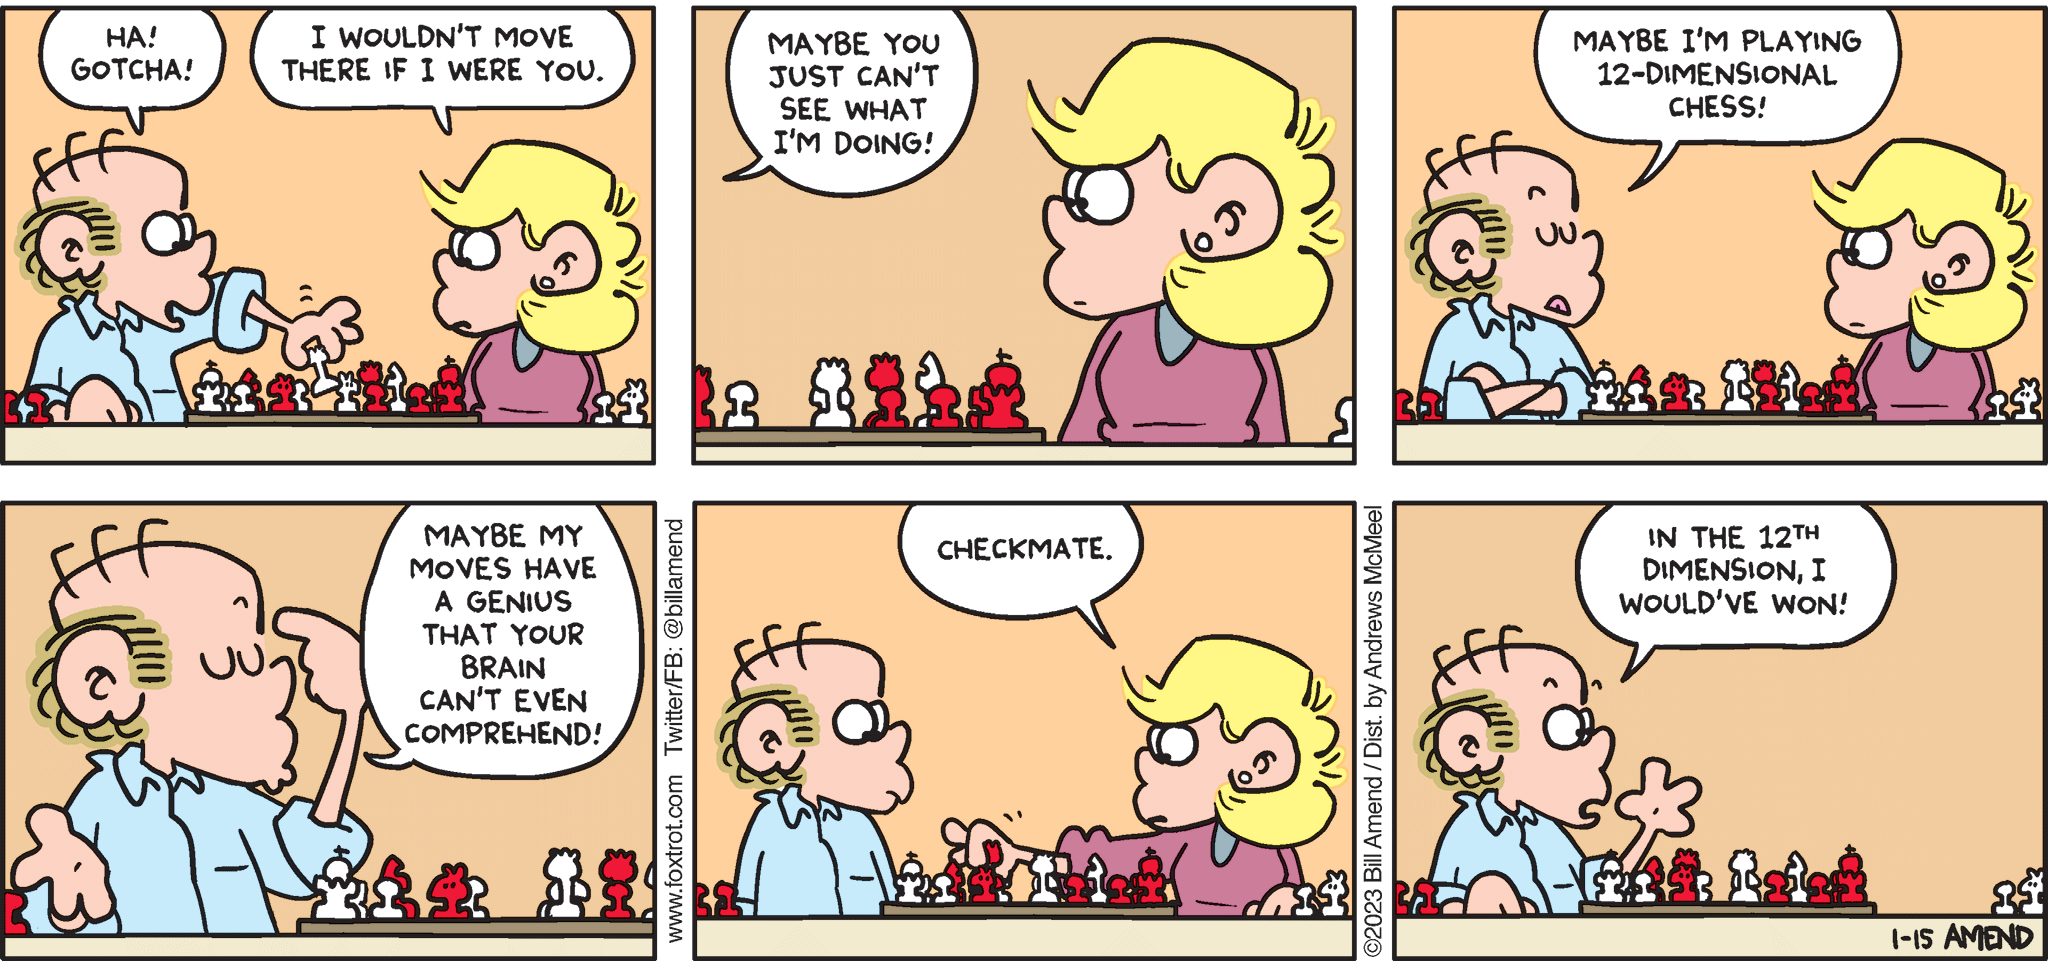 FoxTrot comic strip by Bill Amend - "12-D Chess" published January 15, 2023 - Transcript: Roger Fox: Ha! Gotcha! Andy Fox: I wouldn't move there if I were you. Roger Fox: Maybe you just can't see what I'm doing! Maybe I'm playing 12-dimensional chess! Maybe my moves have a genius that your brain can't even comprehend! Andy Fox: Checkmate! Roger Fox: In the 12th dimension, I would've won!